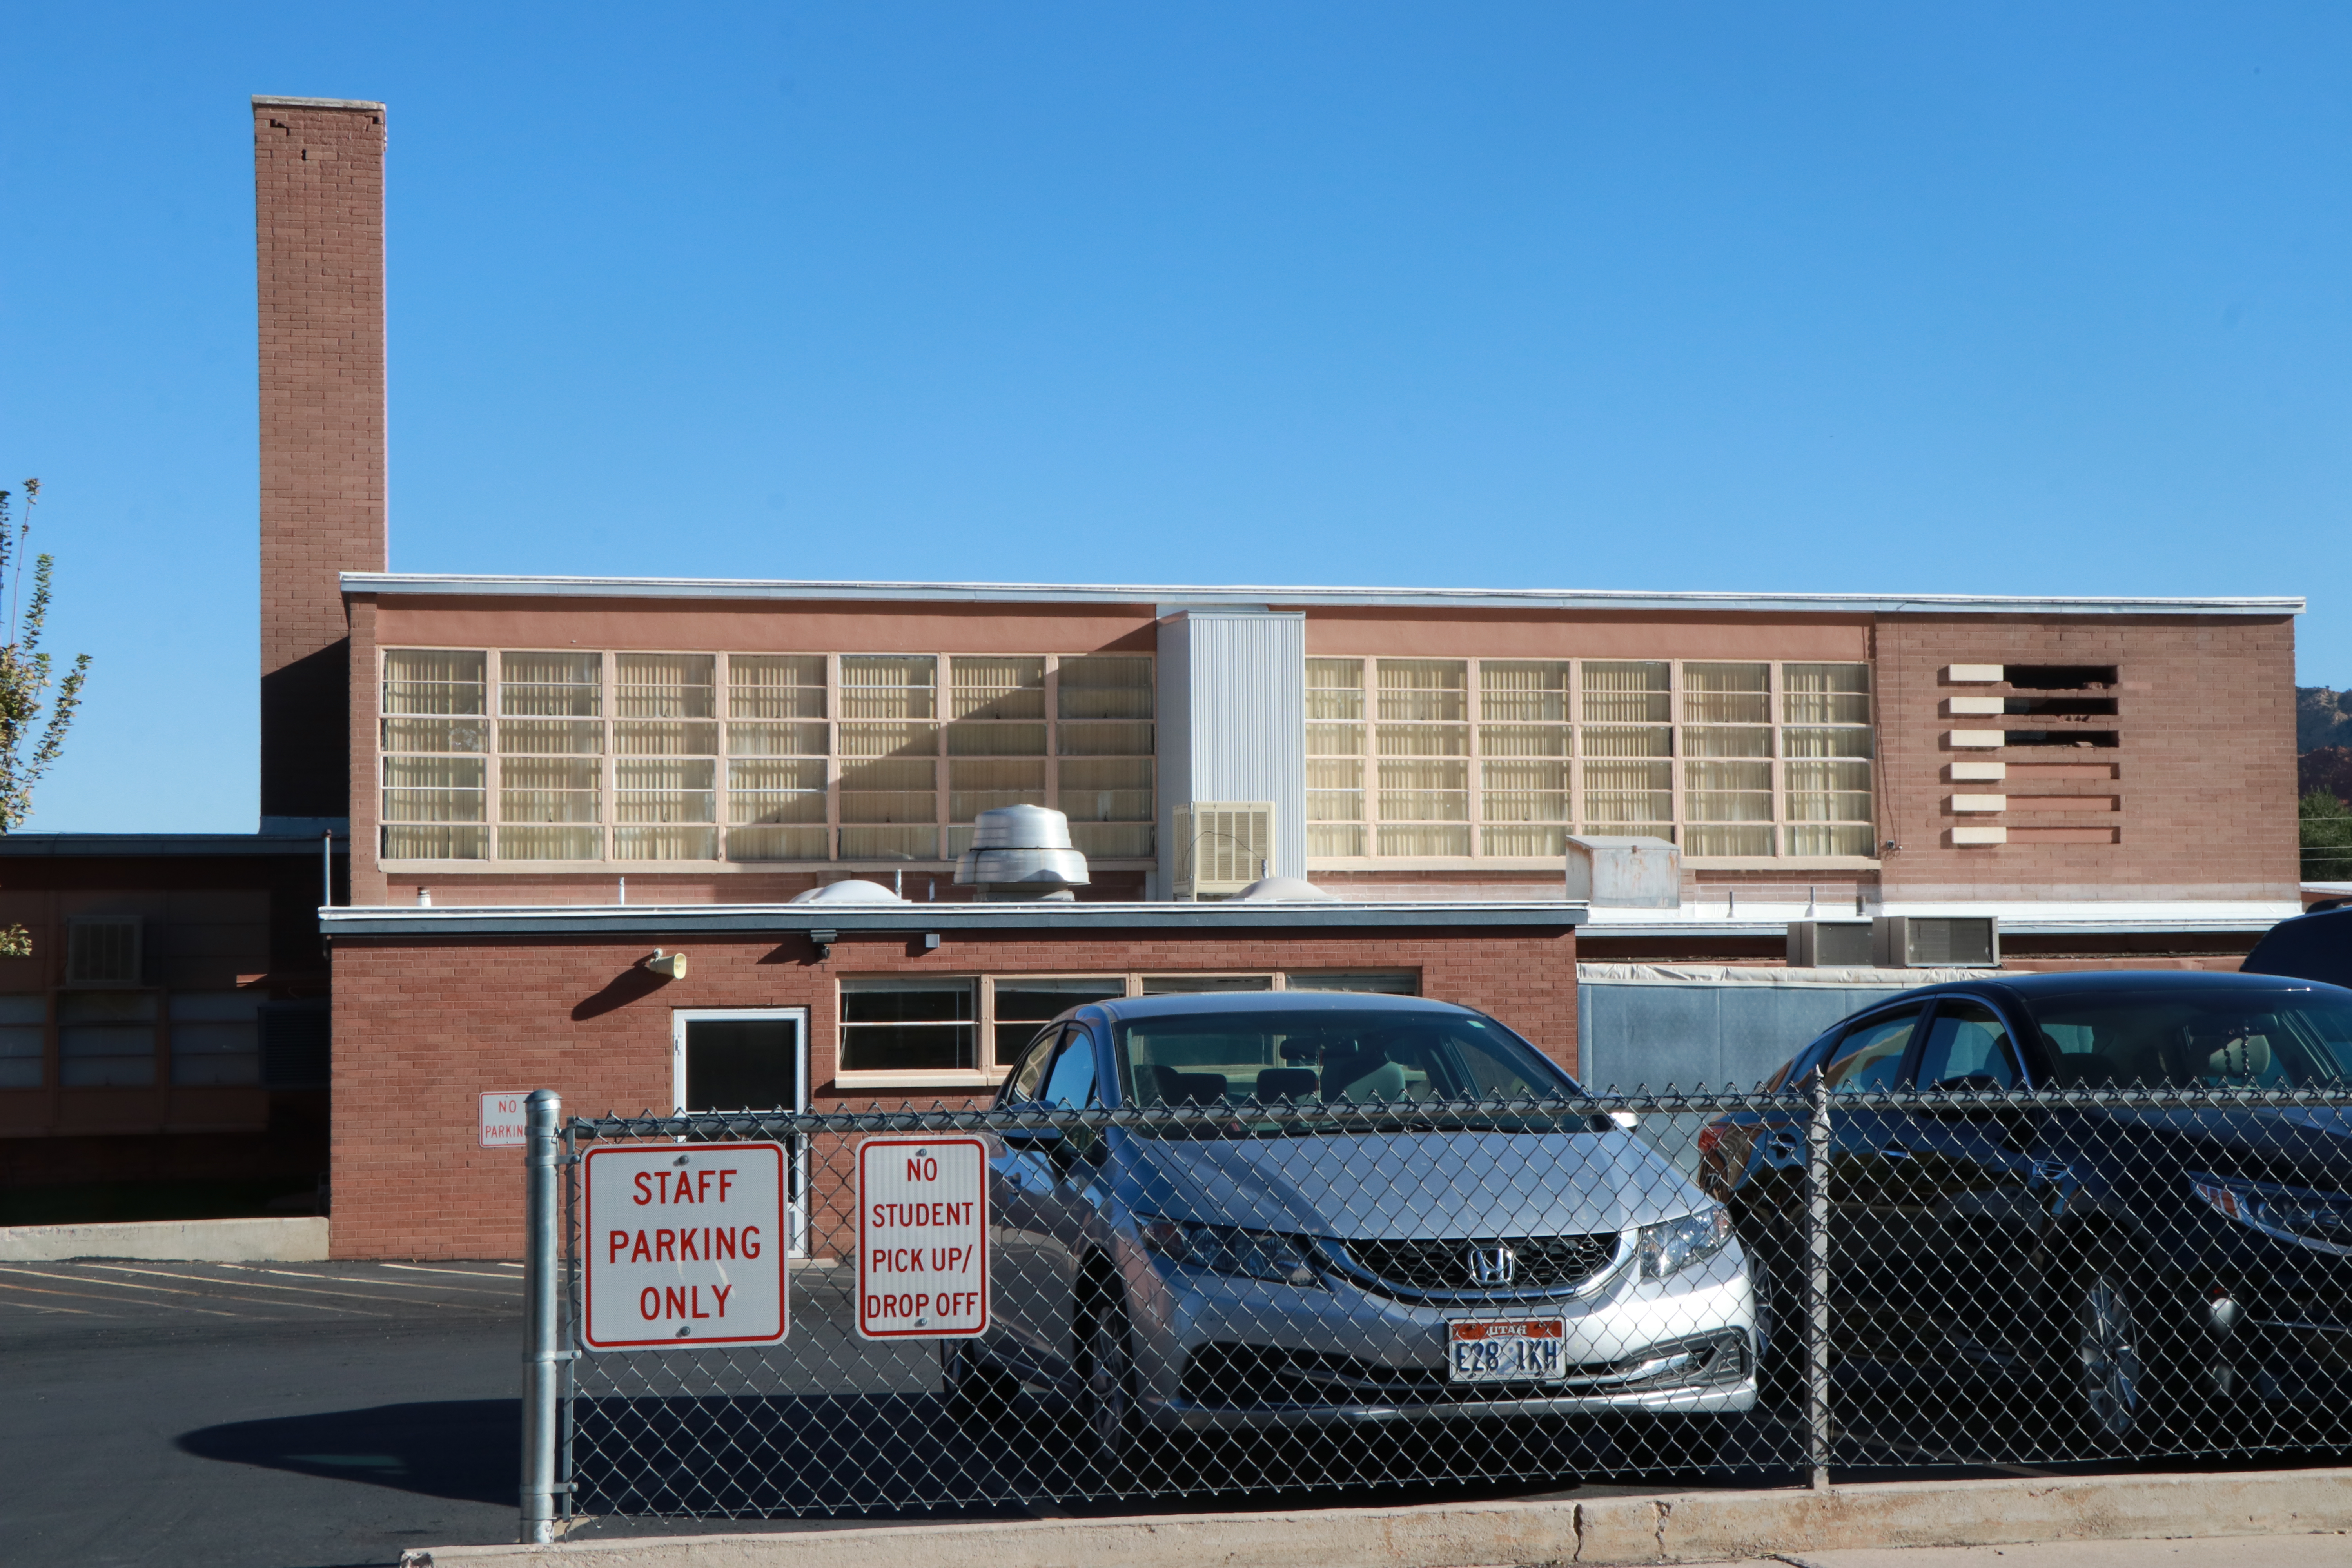 Plans for 2 new schools, security upgrades highlight Iron County School